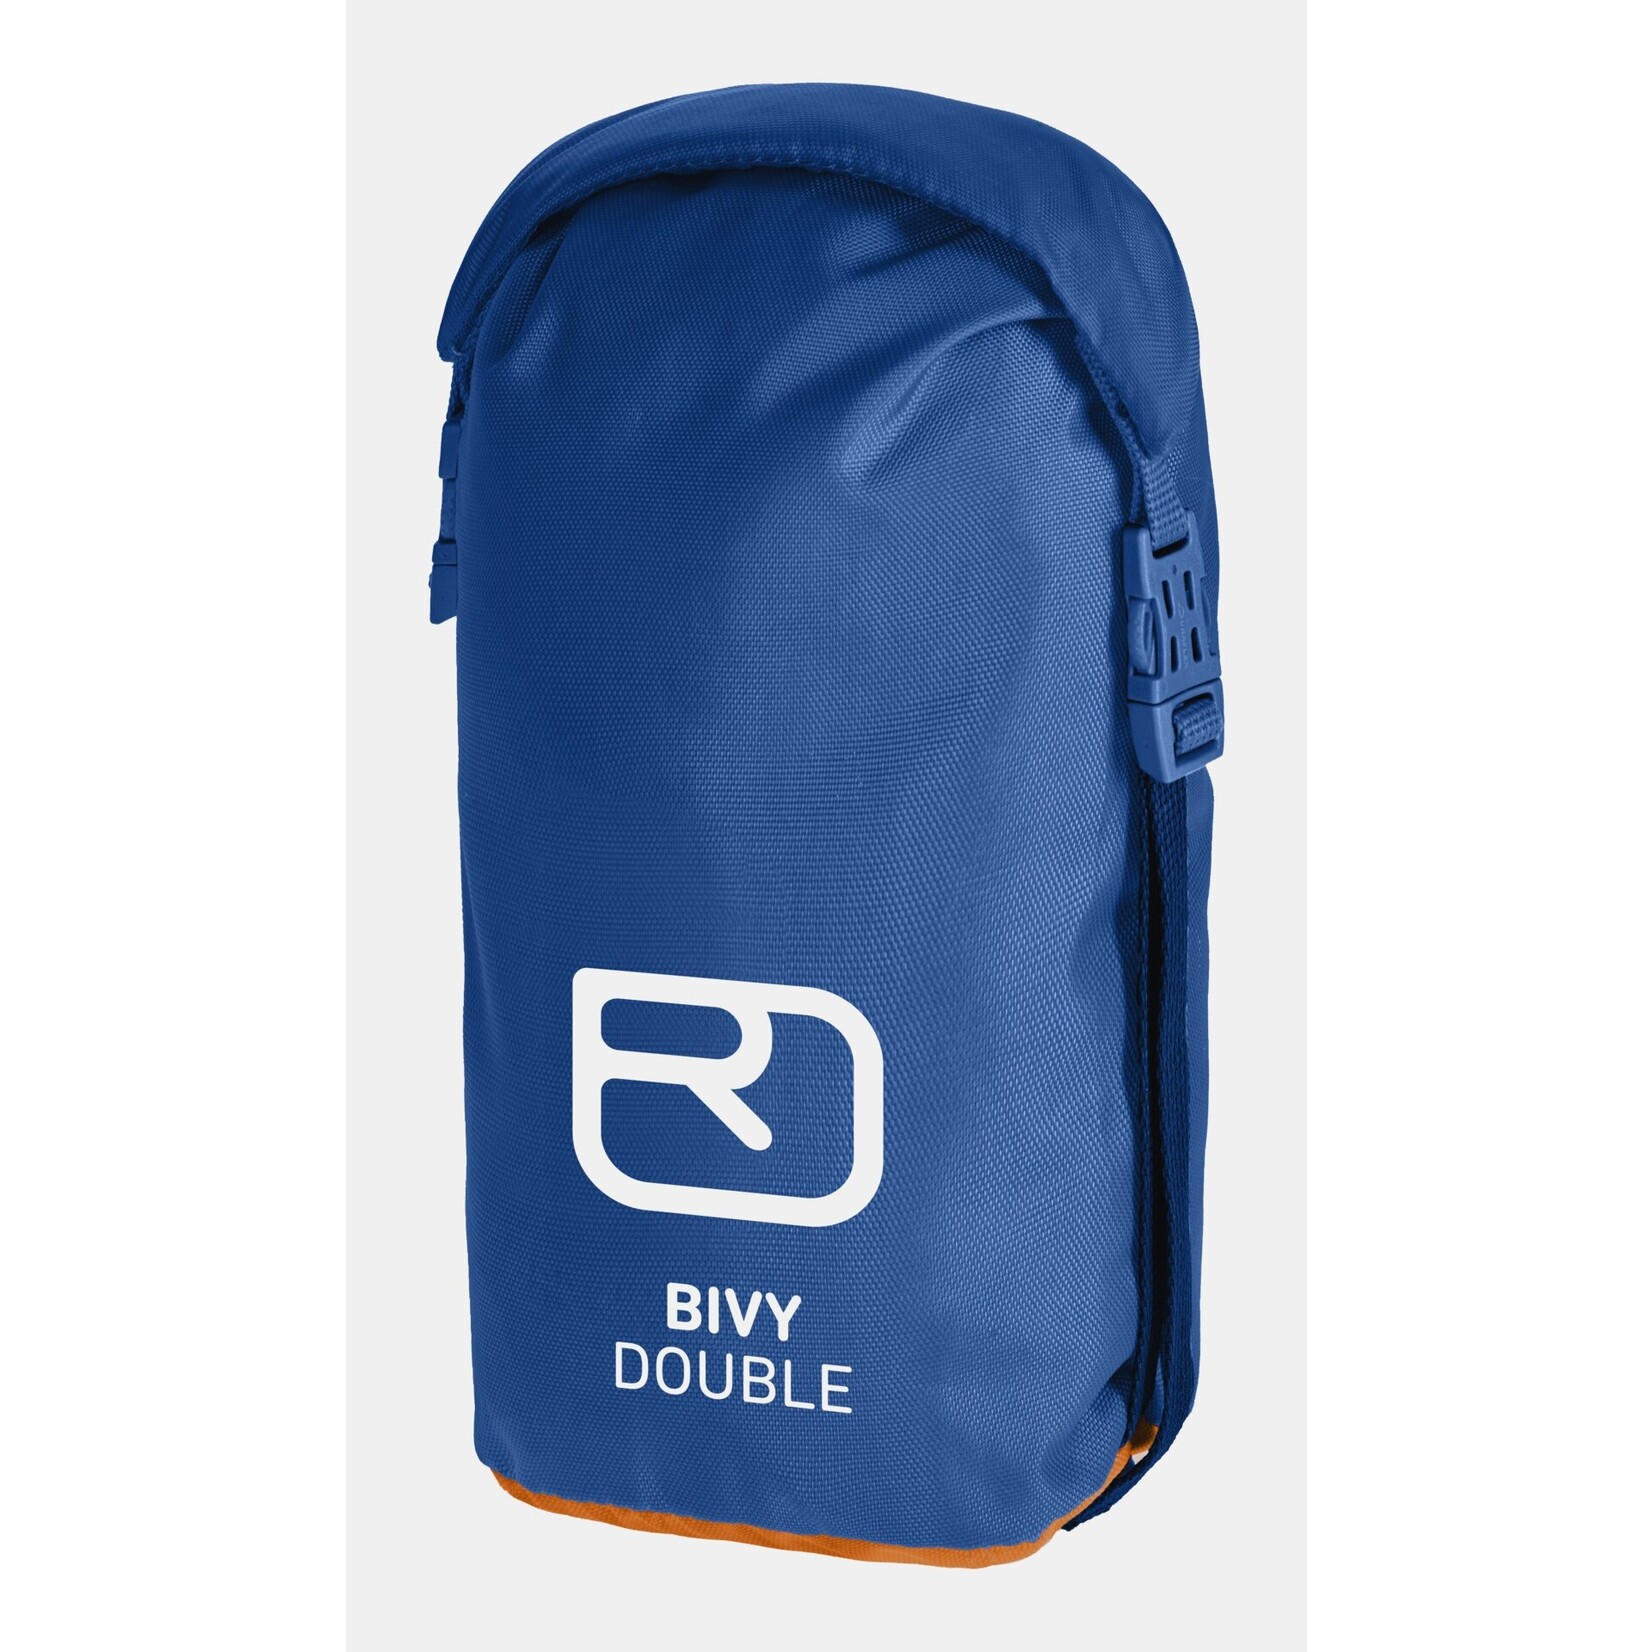 Ortovox NEW Safety Bivy Bag Two Person